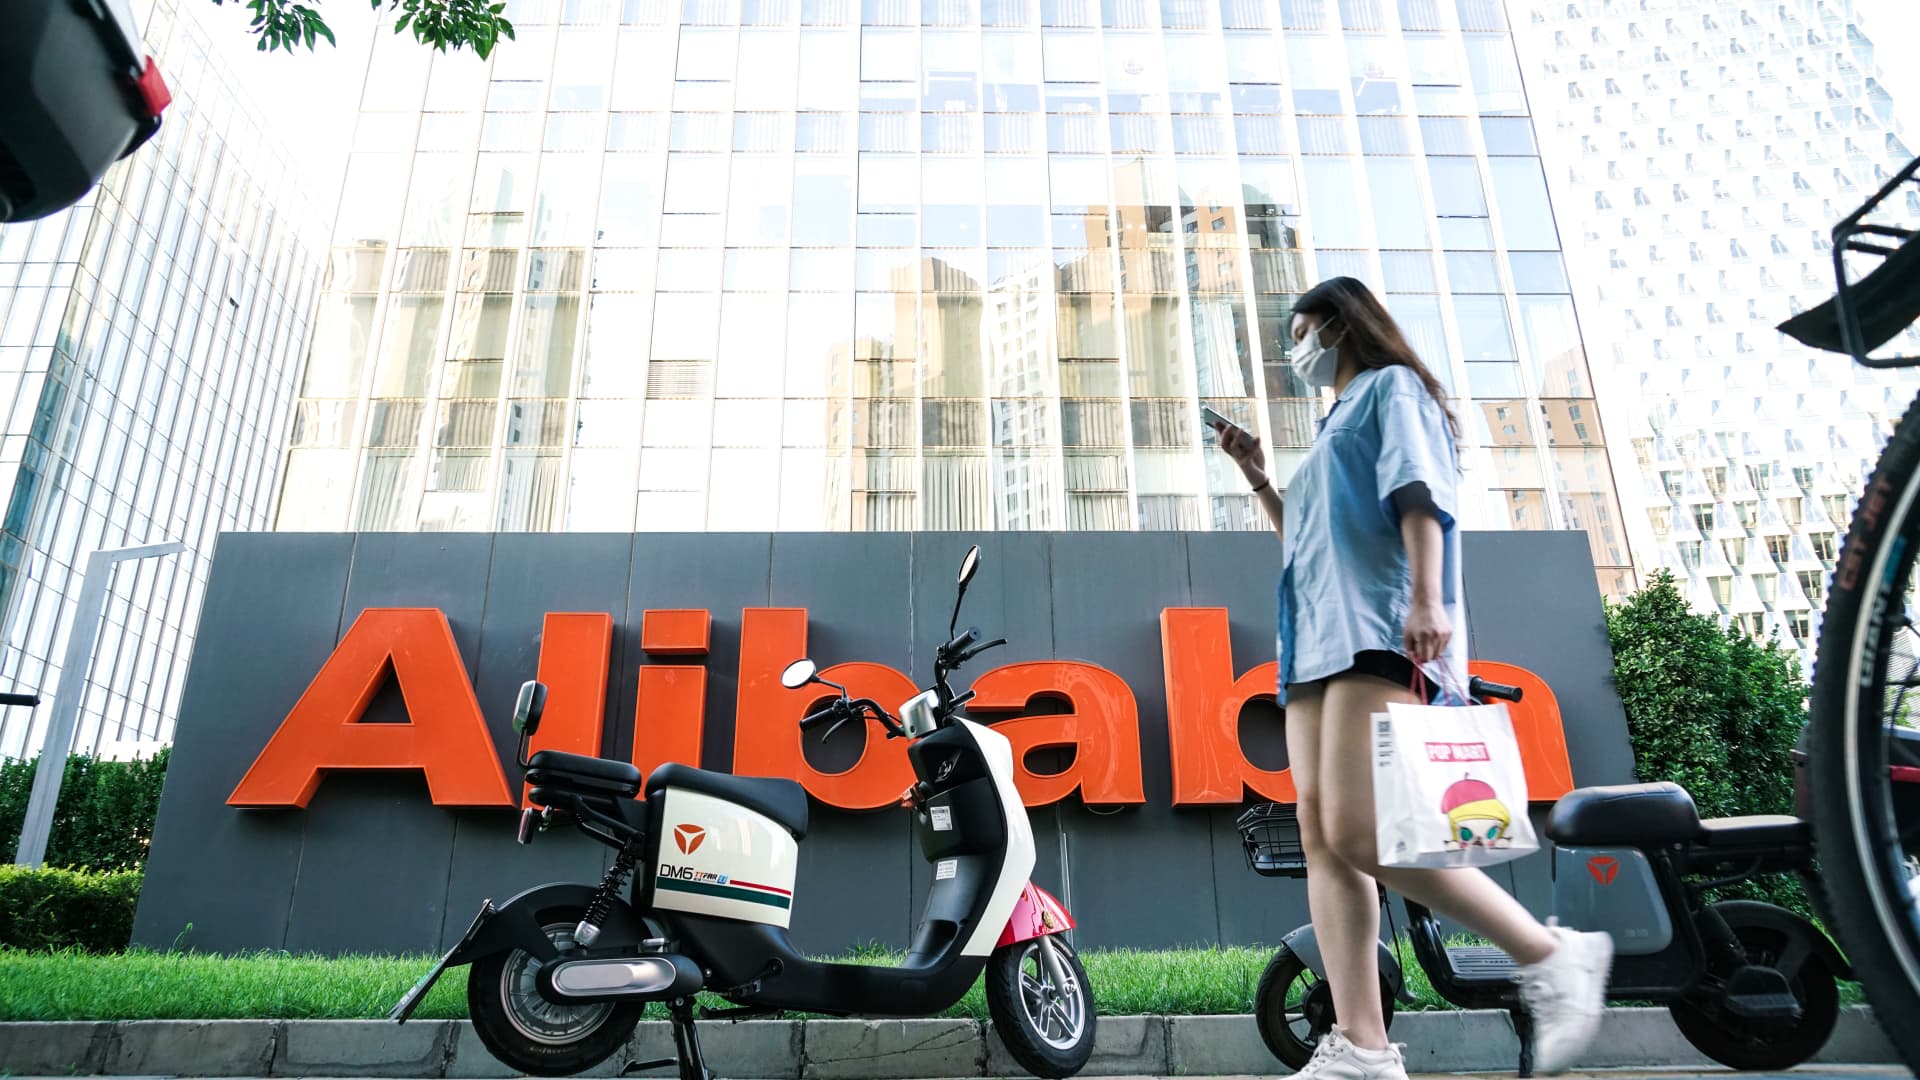 Alibaba to split into 6 units and explore IPOs; shares pop 9%